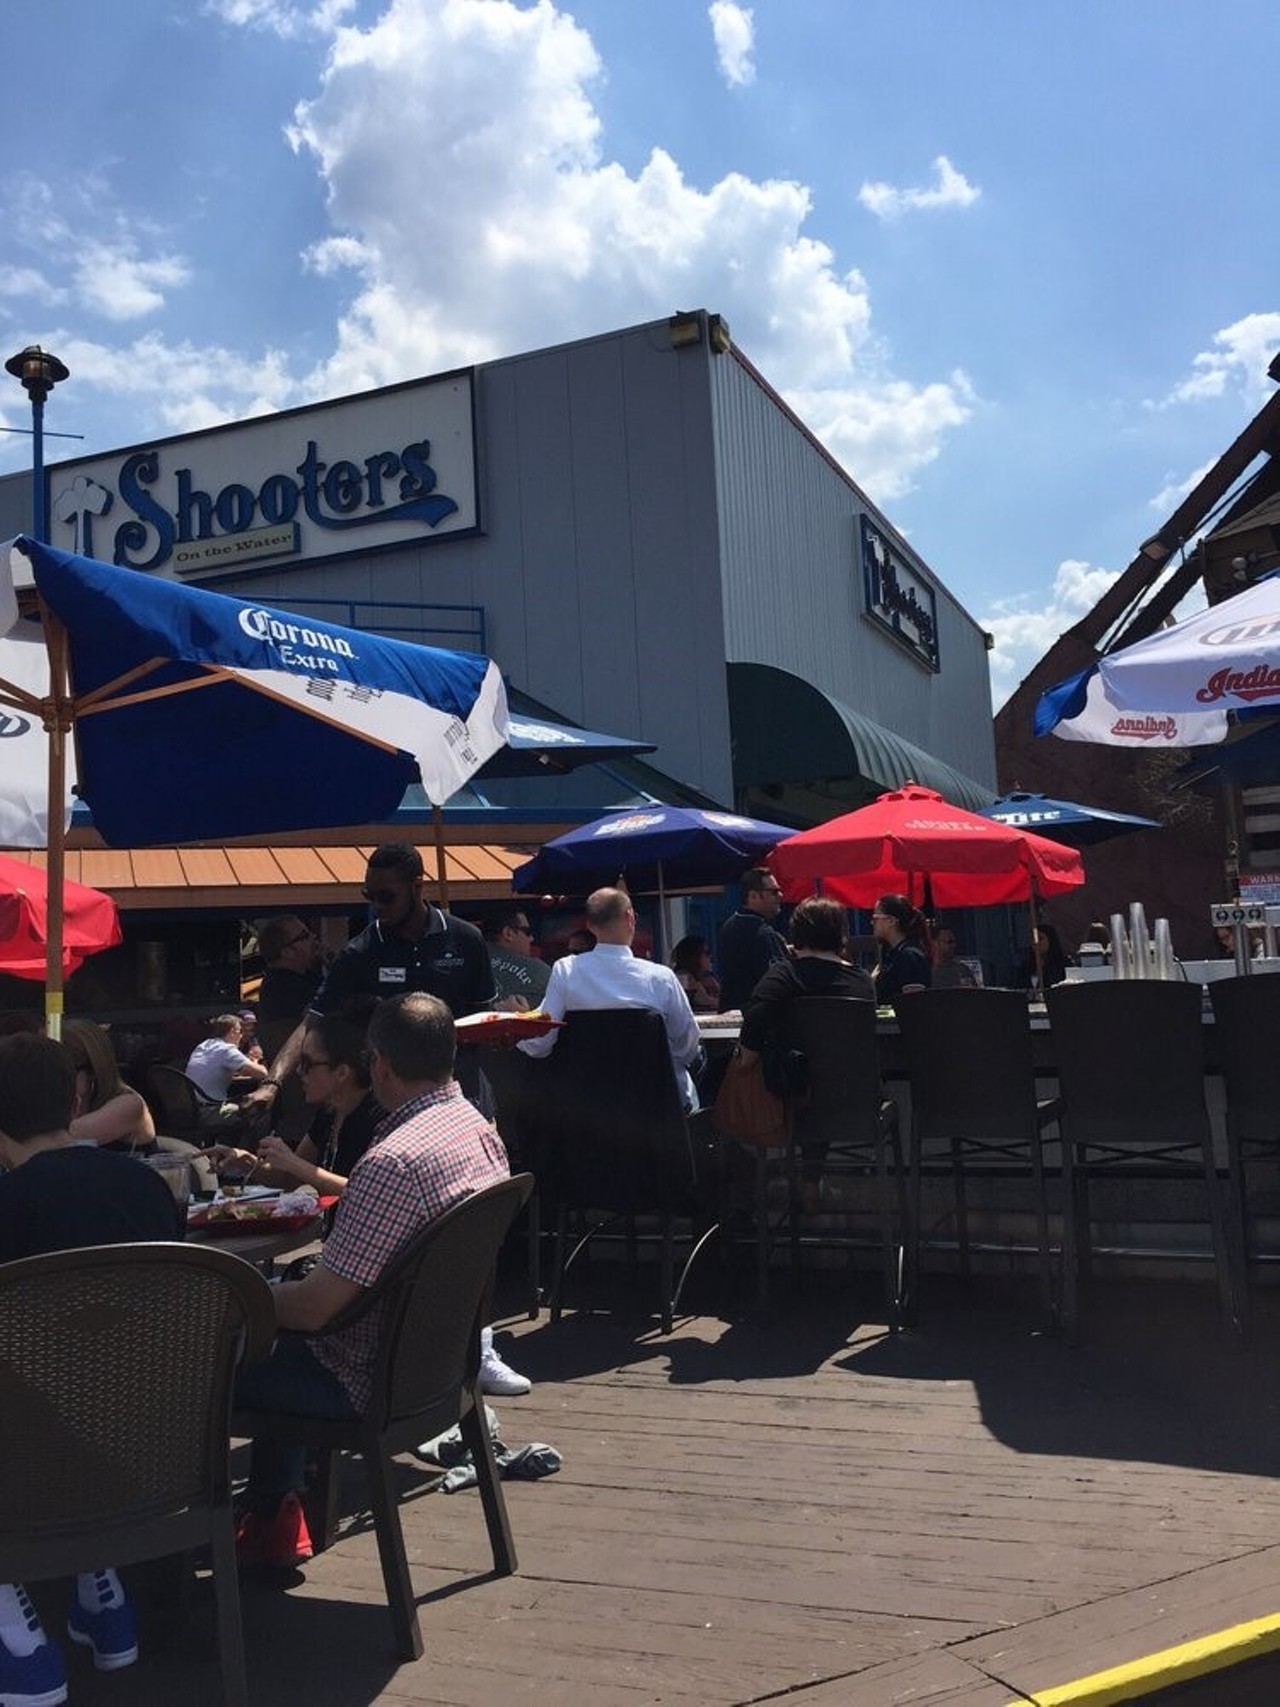 Shooters - 
1148 Main Avenue, Cleveland -
Happy hour: 3:30-6:30 M-F
Shooters has historically been a focal point for the Flats, I know my mom has told me stories of spending time there with friends in her twenties. There&#146;s an outdoor bar, plenty of patio seating, and endless Instagram-worthy picture spots. Right off RTA stop, providing easy access and views of trains, bridges, ships at harbor. If that&#146;s not enough to convince you, the $5 cocktails and $5.50 appetizers might just do the trick.
http://www.shootersflats.com/